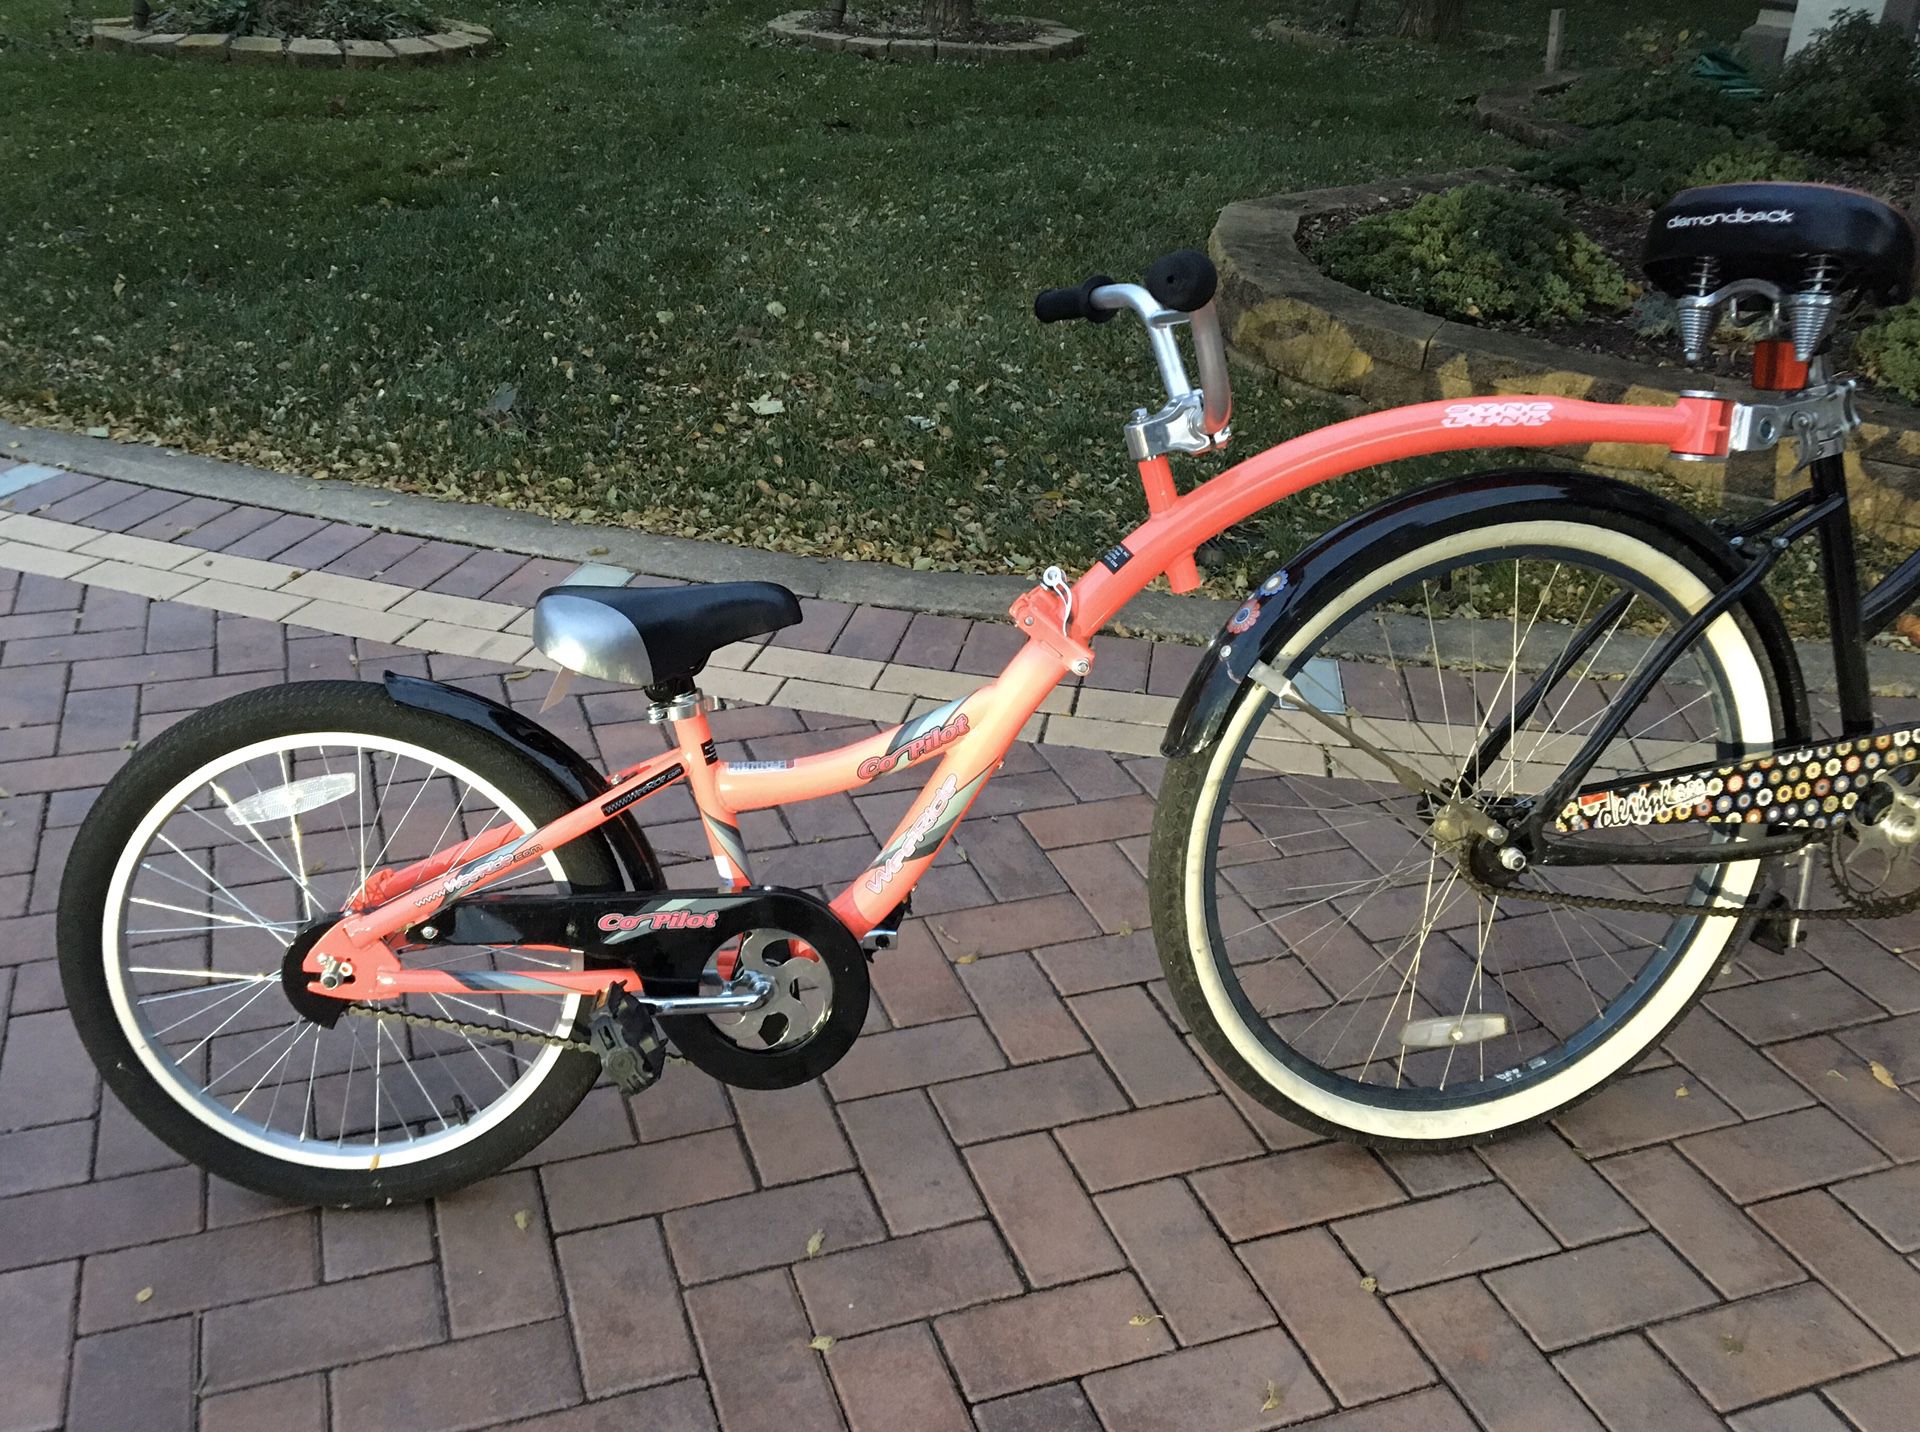 Bike seat for kids attached to adults bike - only pink